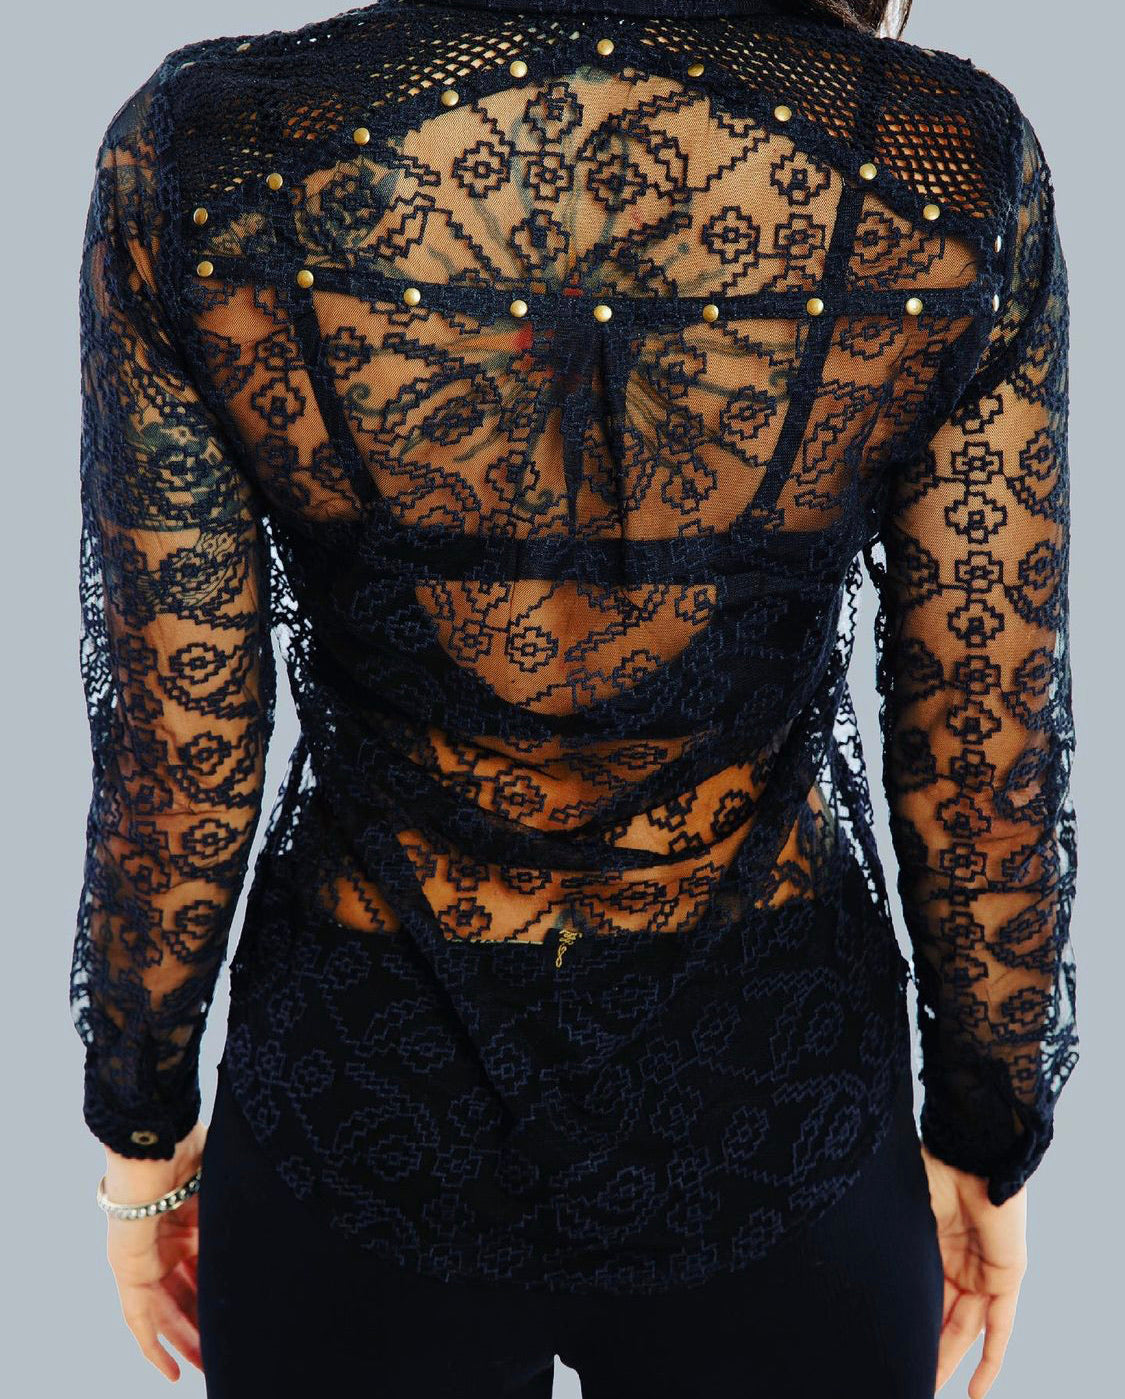 Black Lace shirt with ethno patterns and brass buttons and studs